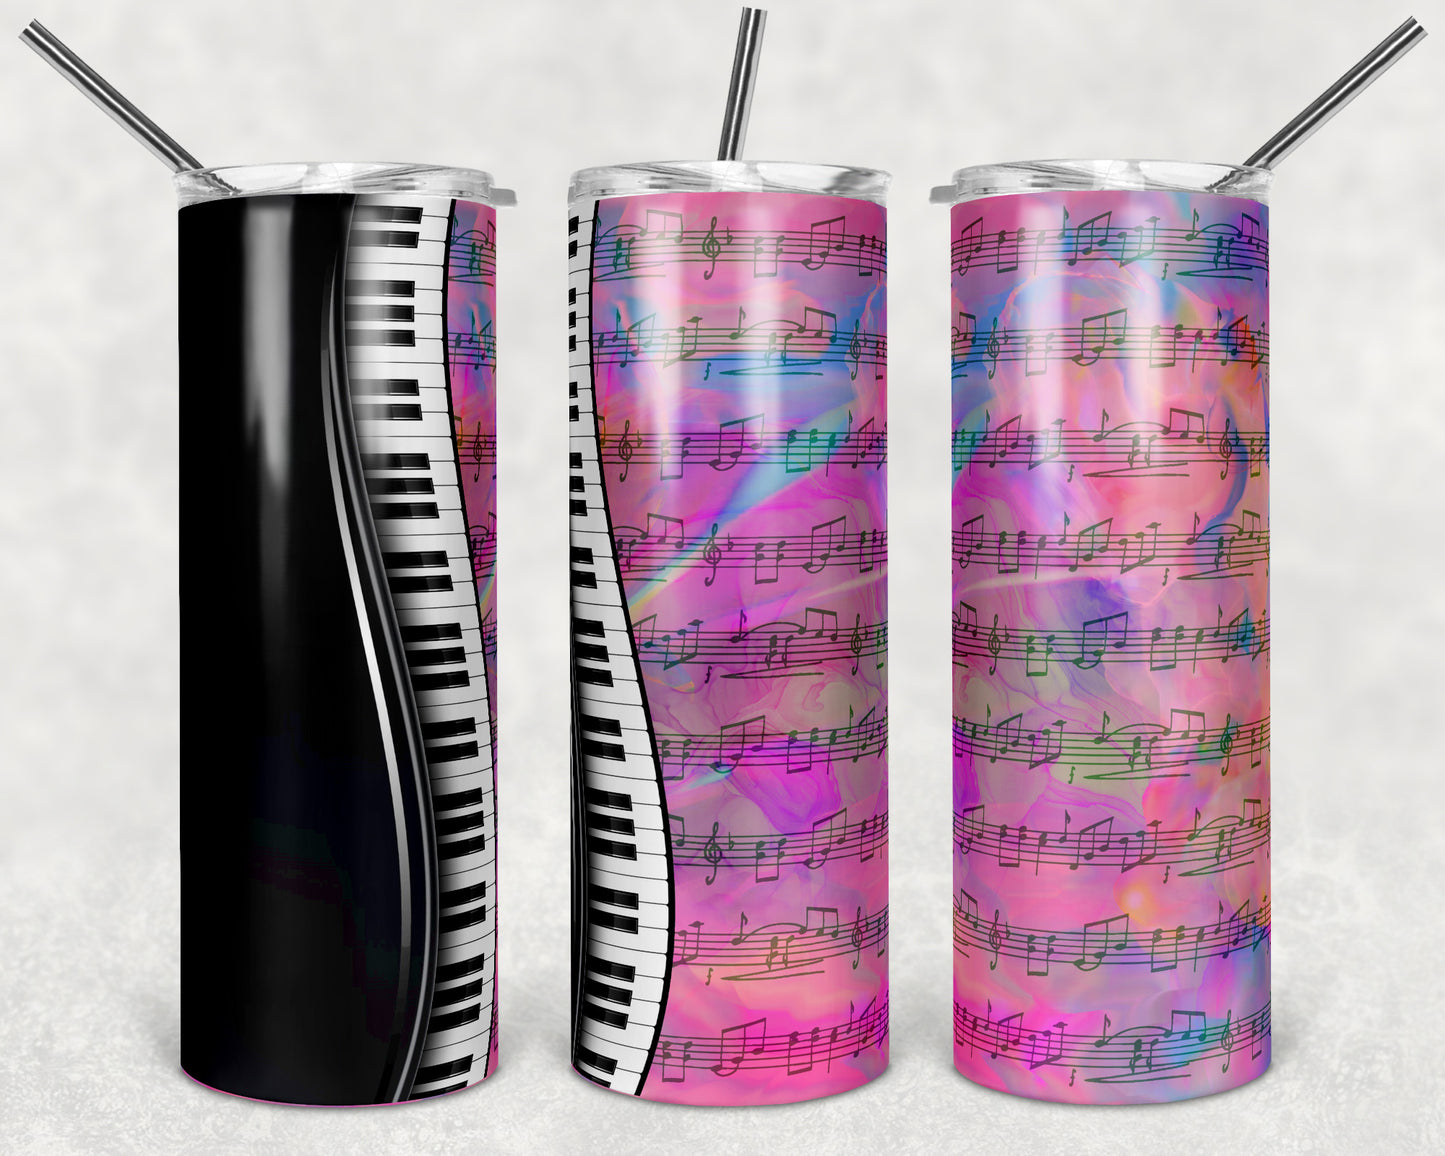 Piano and Music Notes